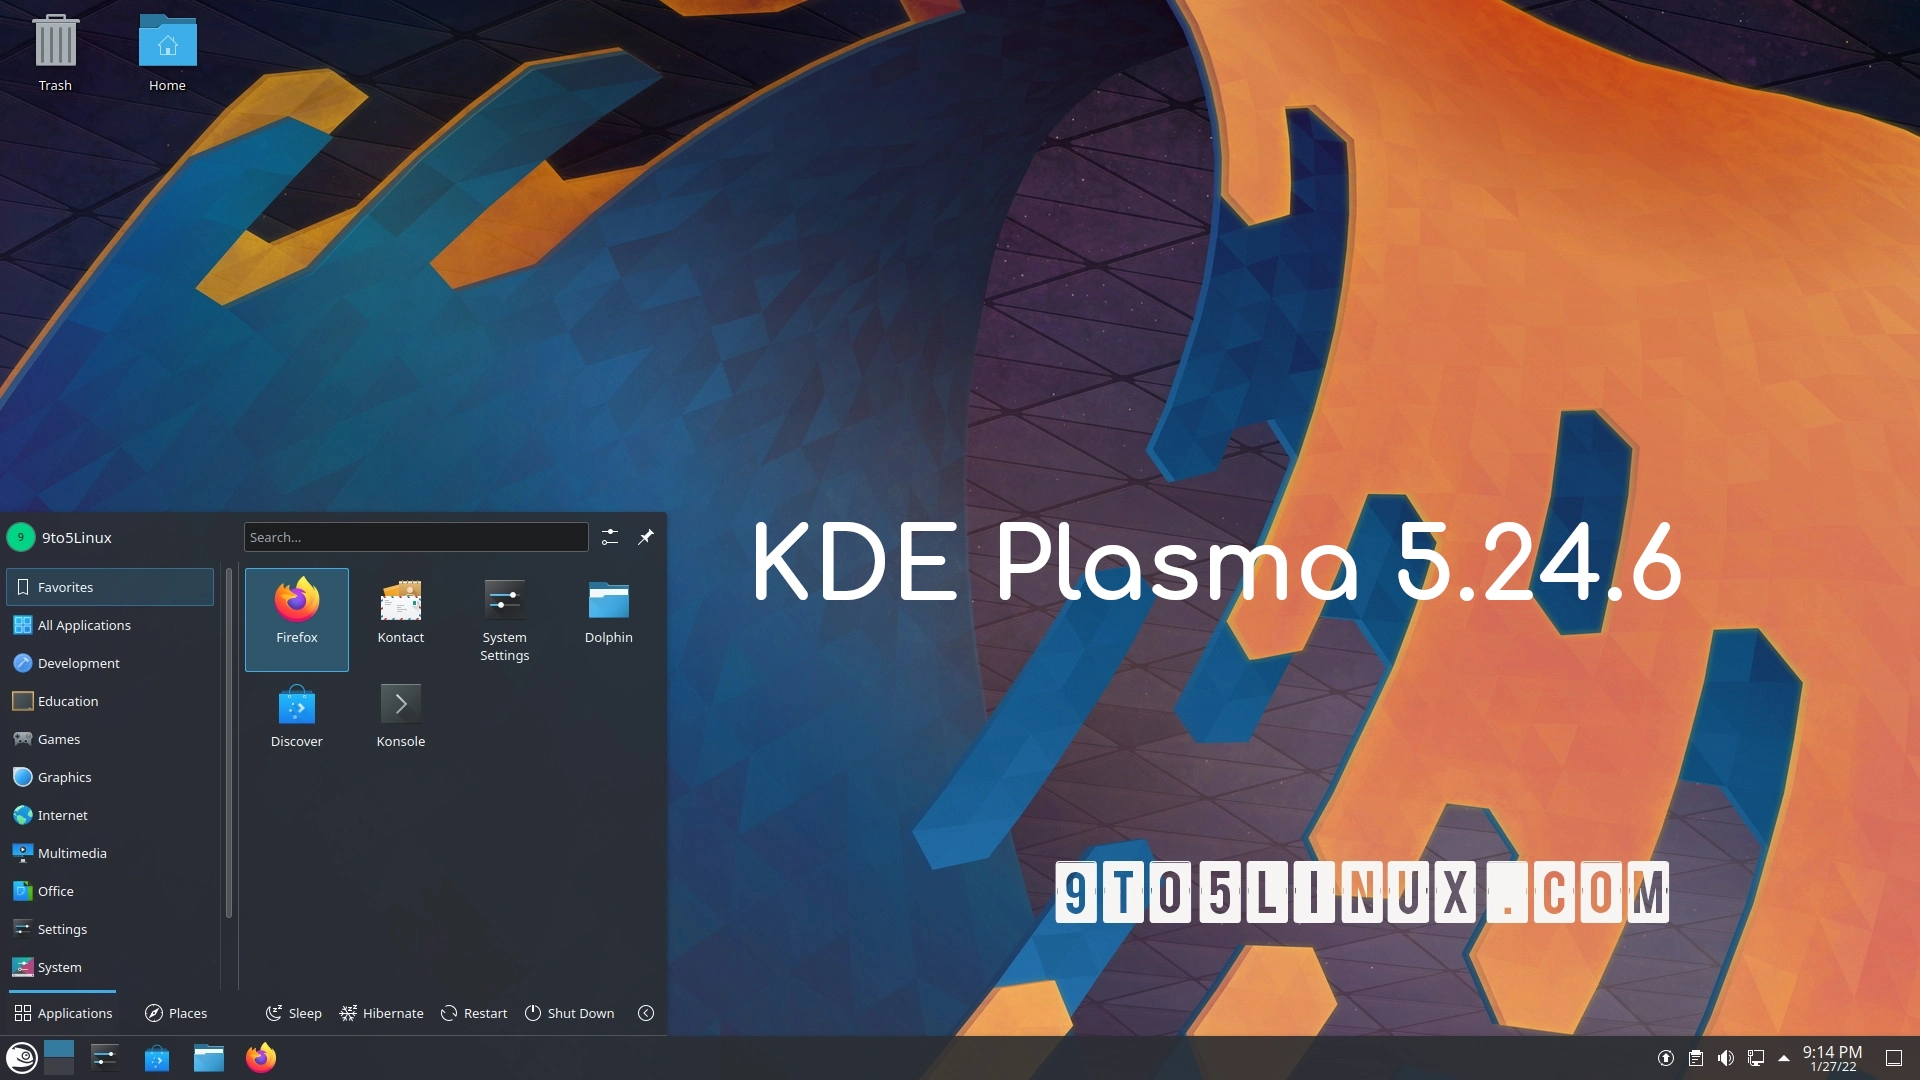 KDE Plasma 5.24.6 LTS Brings Many Fixes to Plasma Wayland, System Settings, and More